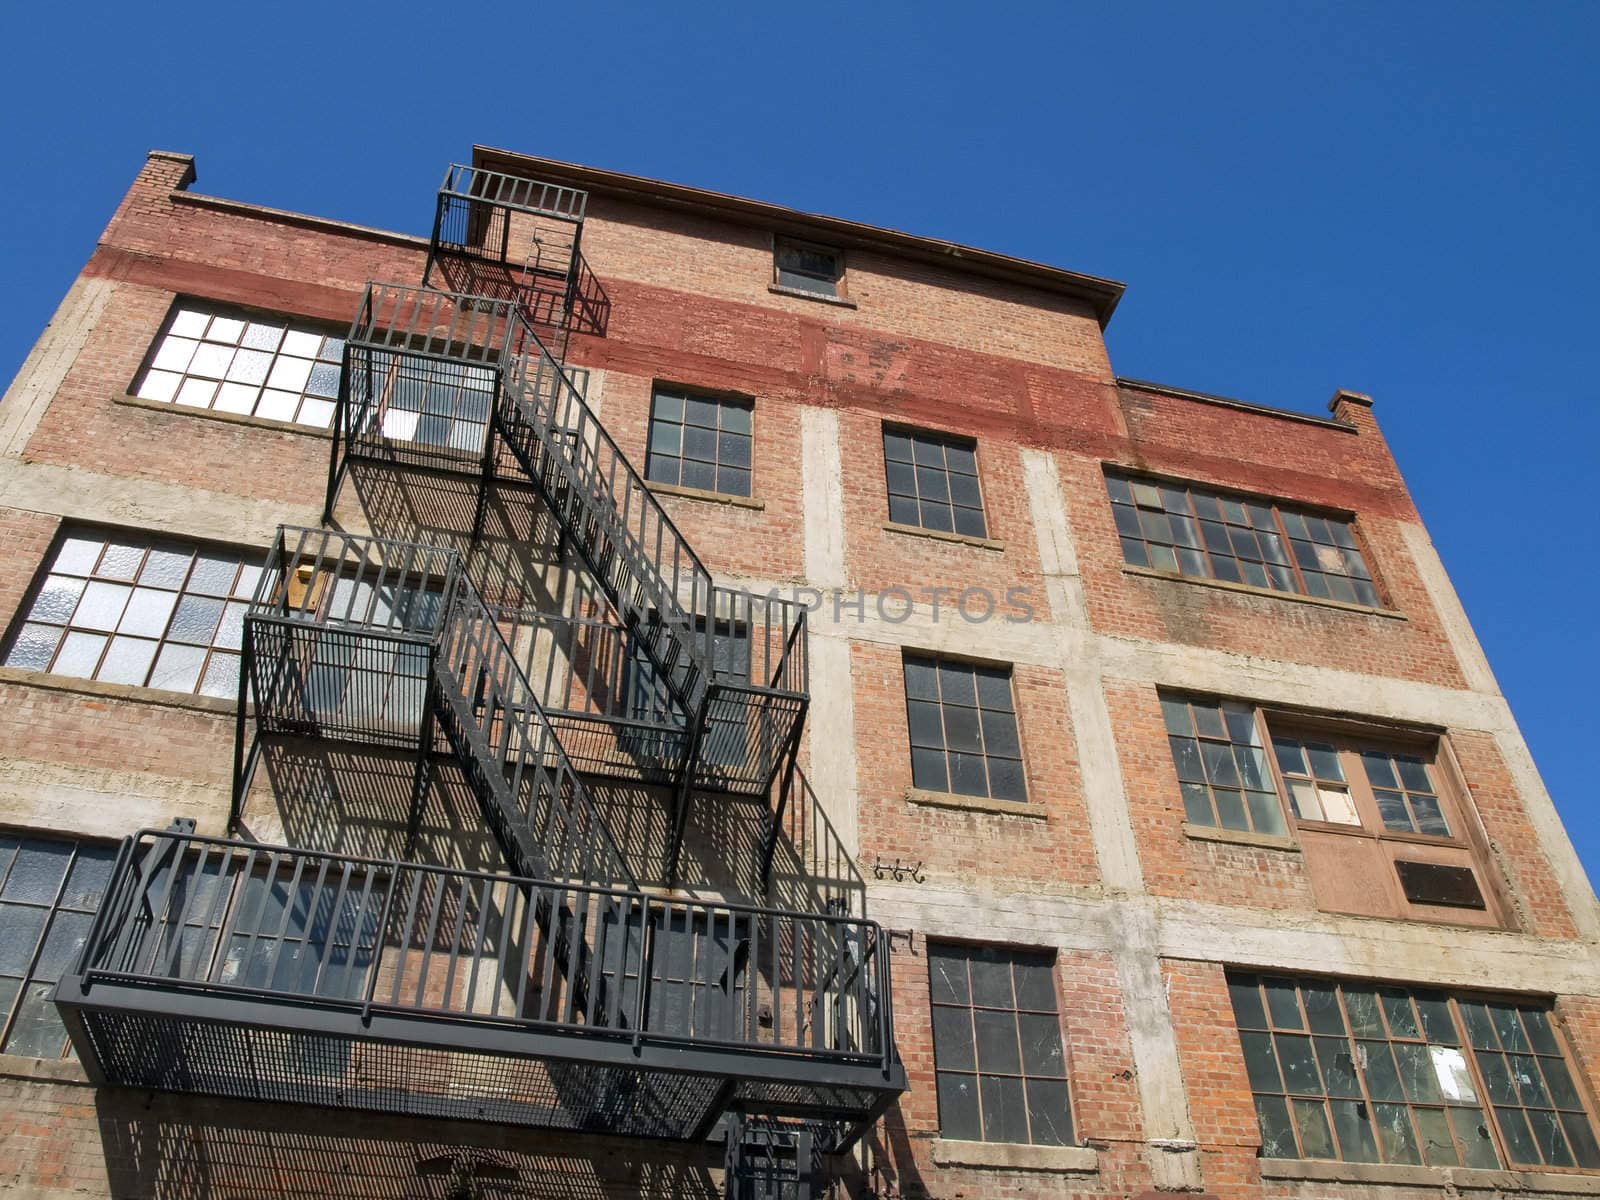 Old fire escape on an abandoned brick building.